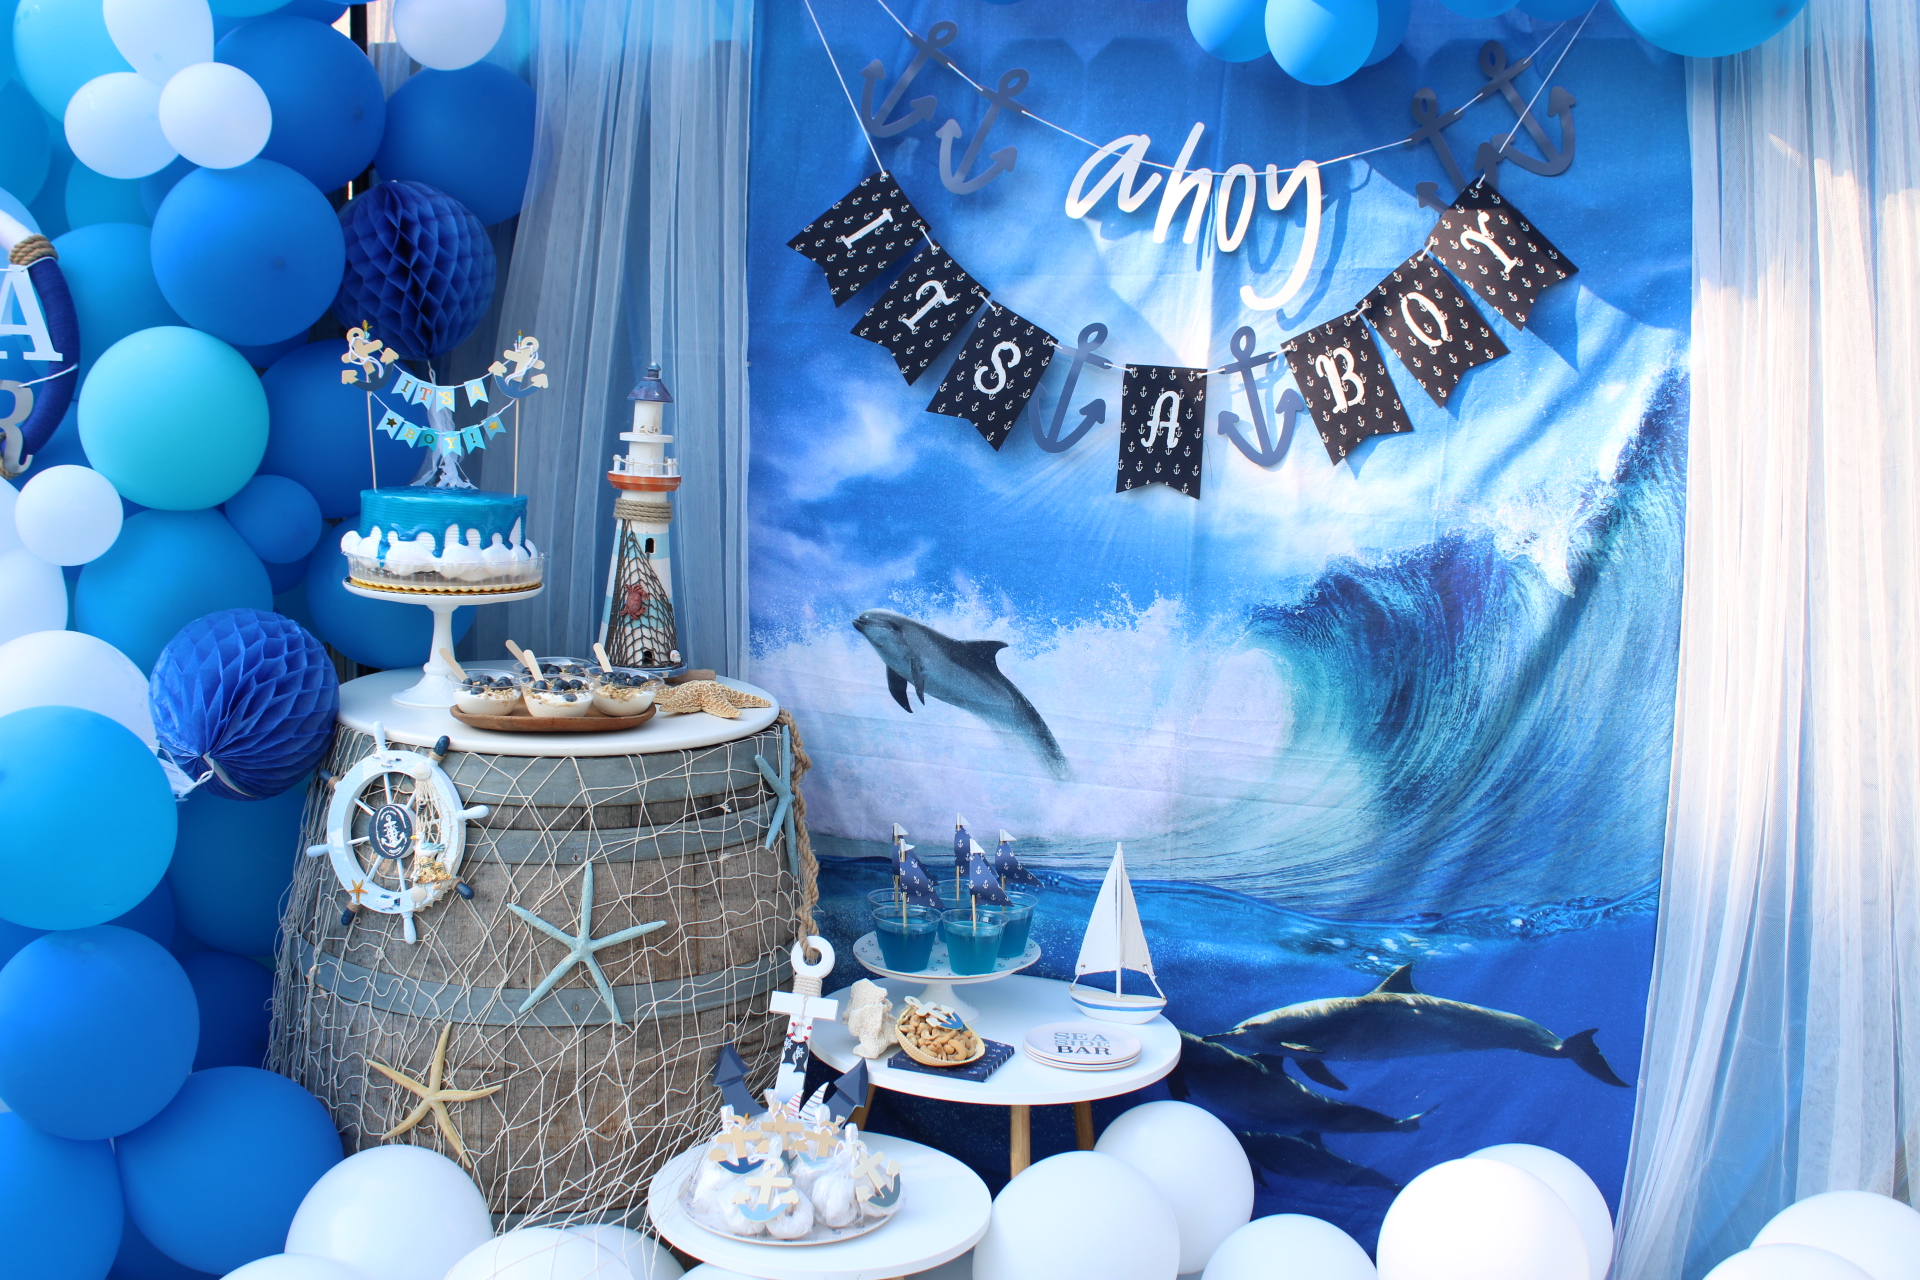 Ahoy its a Boy! Nautical Baby Shower - Party Design, Styling and Decoration  - North Bay California